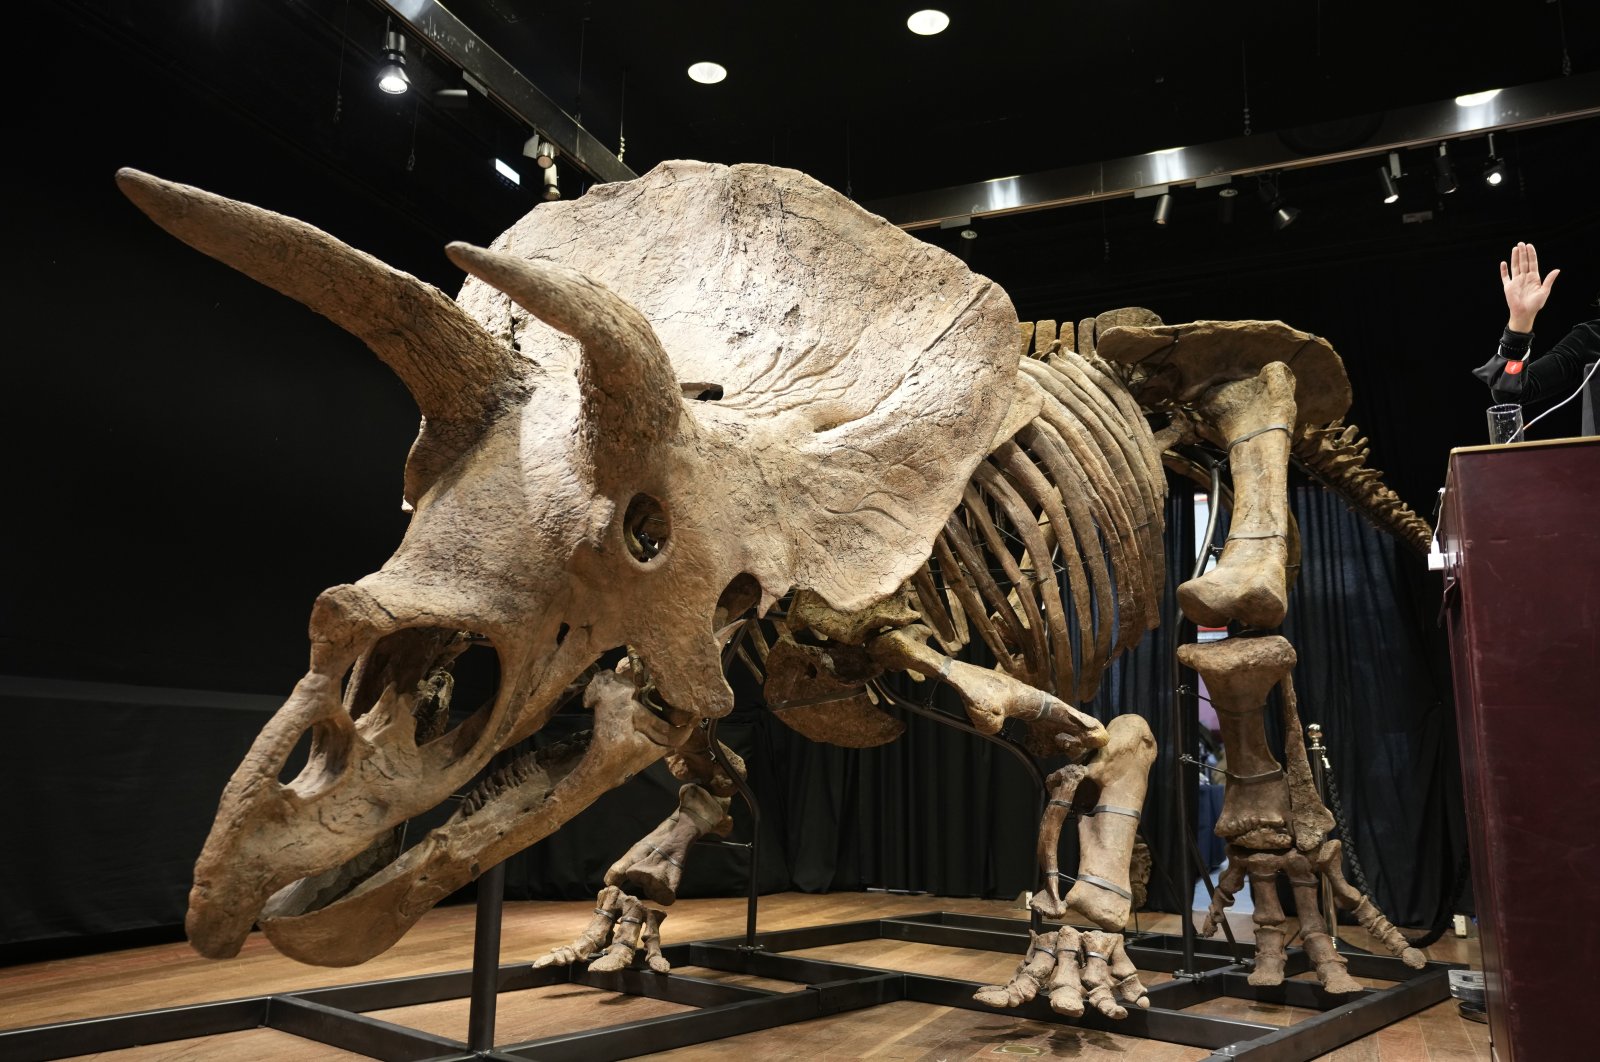 The world's biggest triceratops skeleton, known as "Big John," can be seen during its auction in Paris, France, Oct. 21, 2021. (AP Photo)